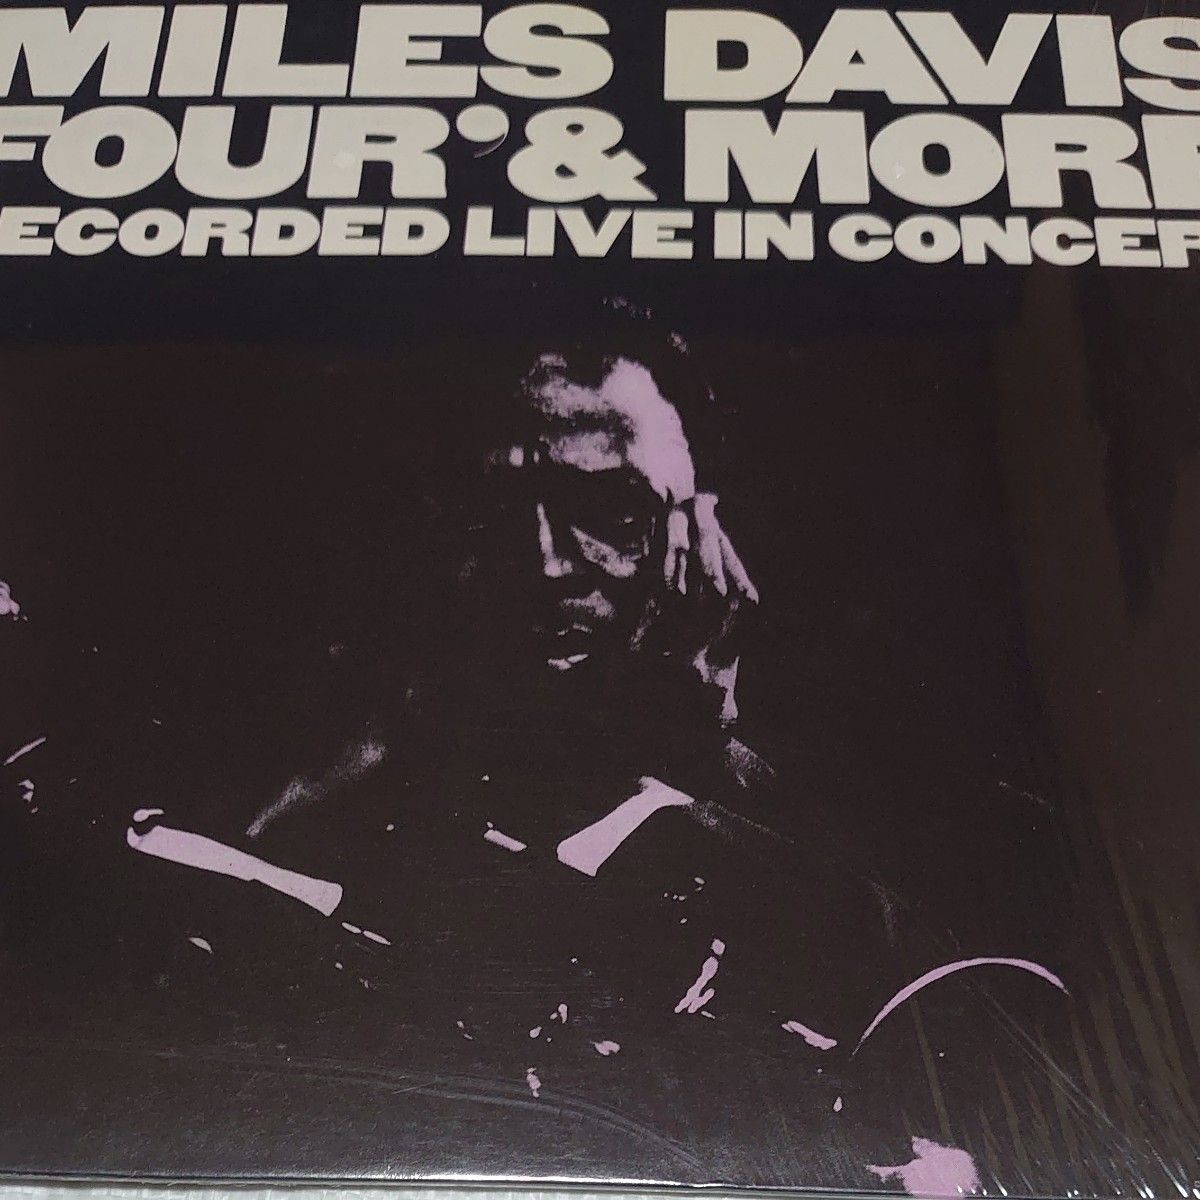 Miles Davis　 Four& More　 Recorded 　Live　in Concert　　 US 盤